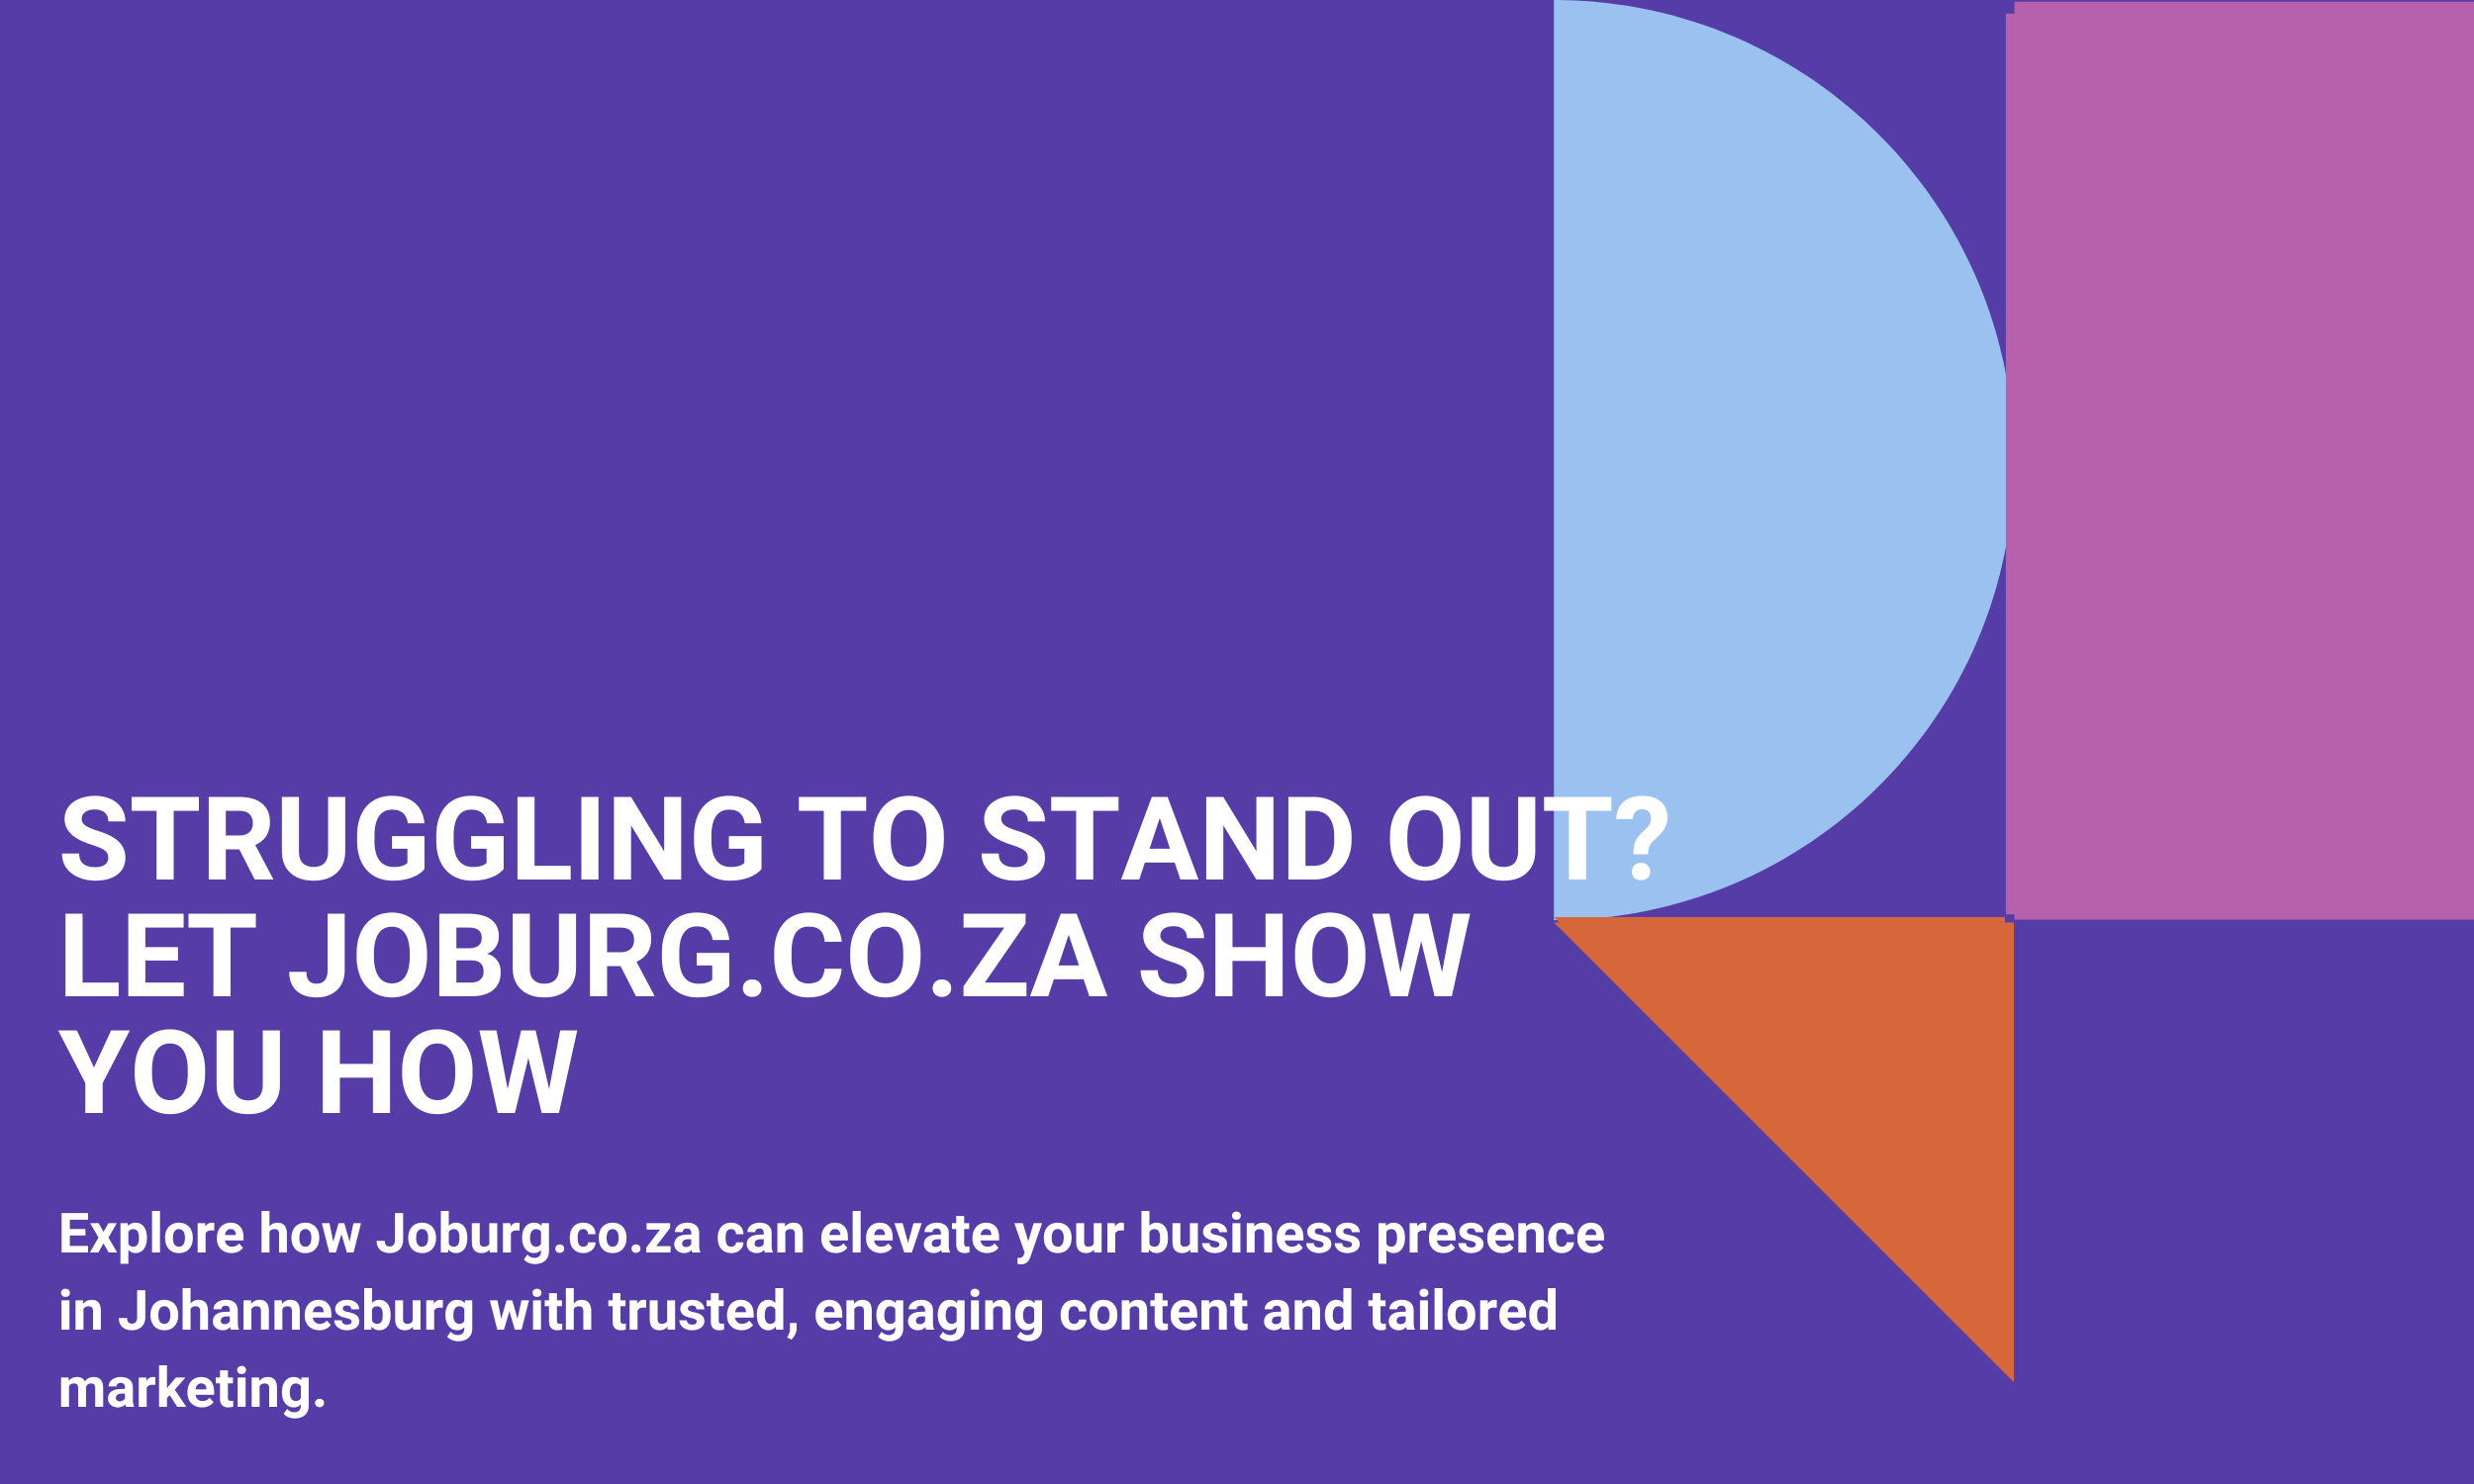 Struggling to Stand Out? Let Joburg.co.za show you how